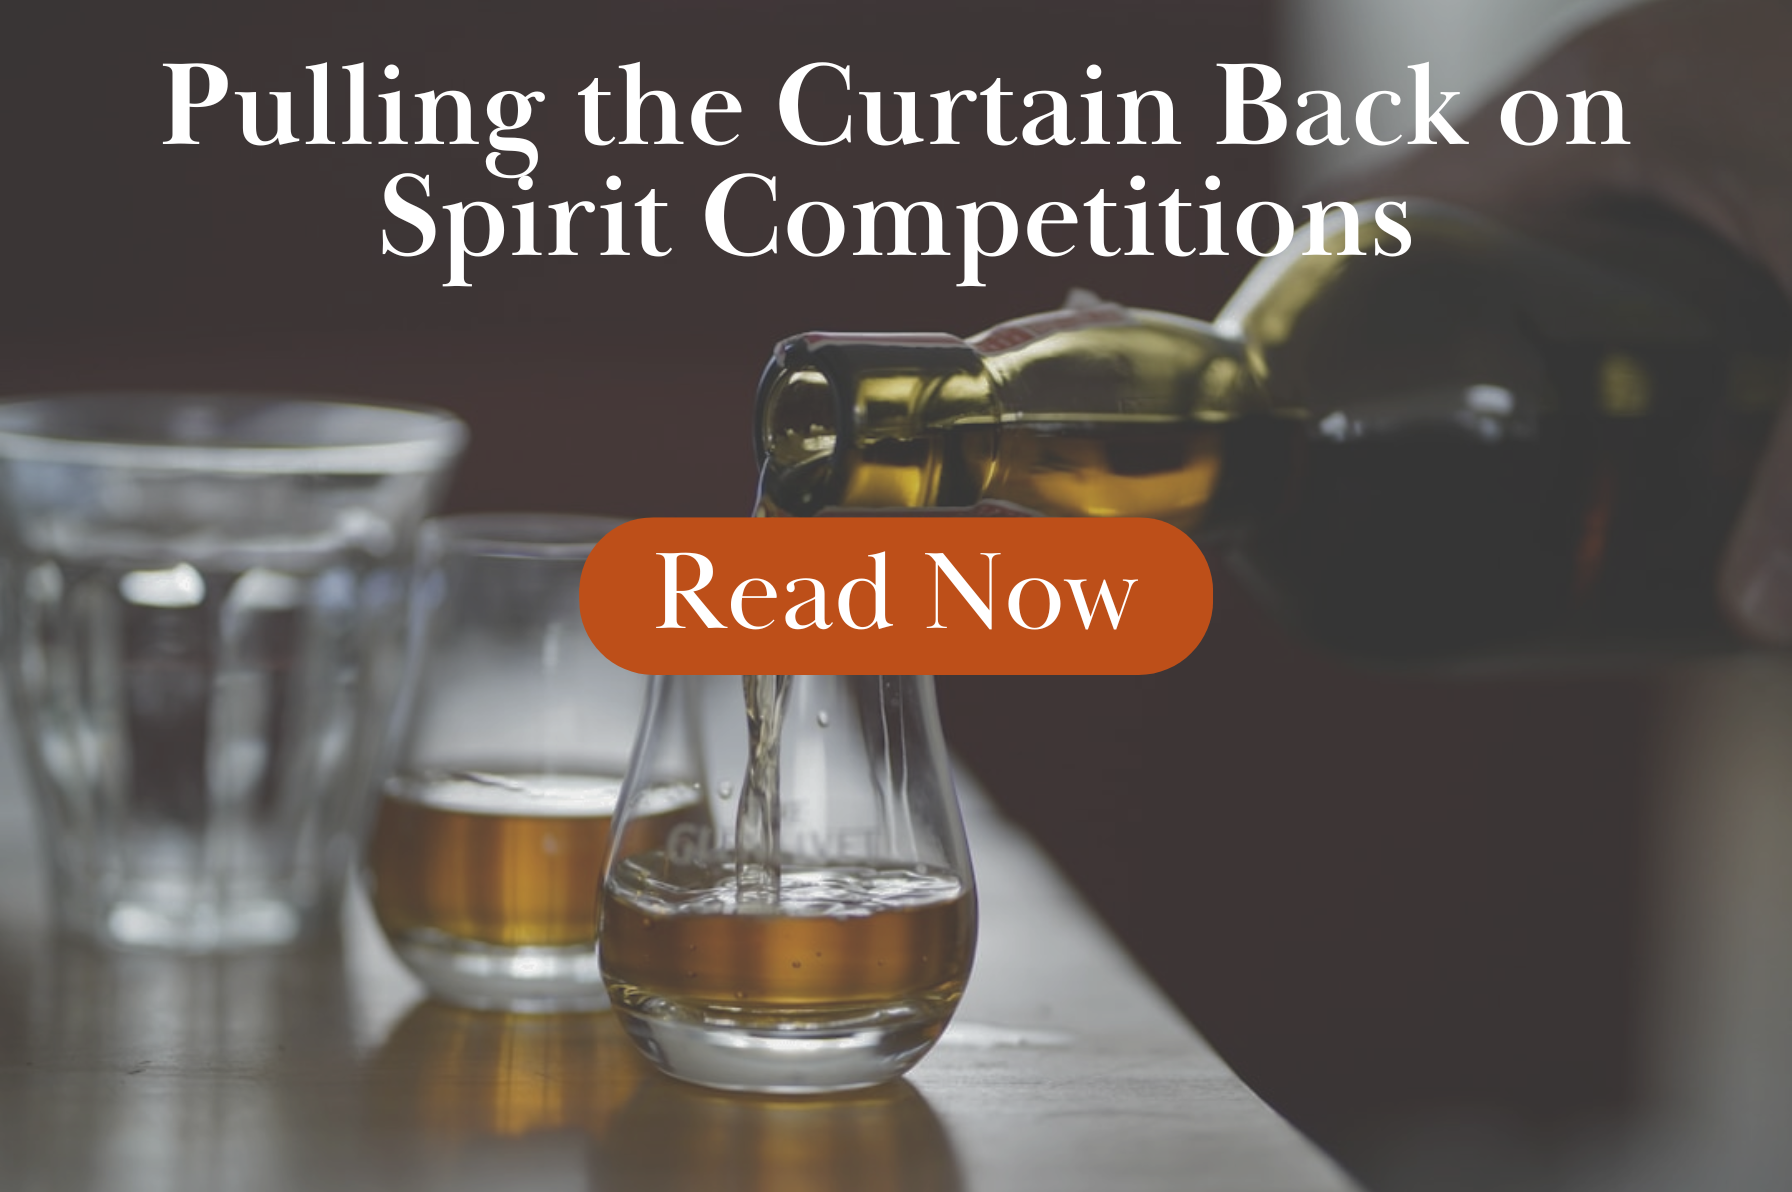 Spirits Competitions: Behind the Scenes with Derek Brown